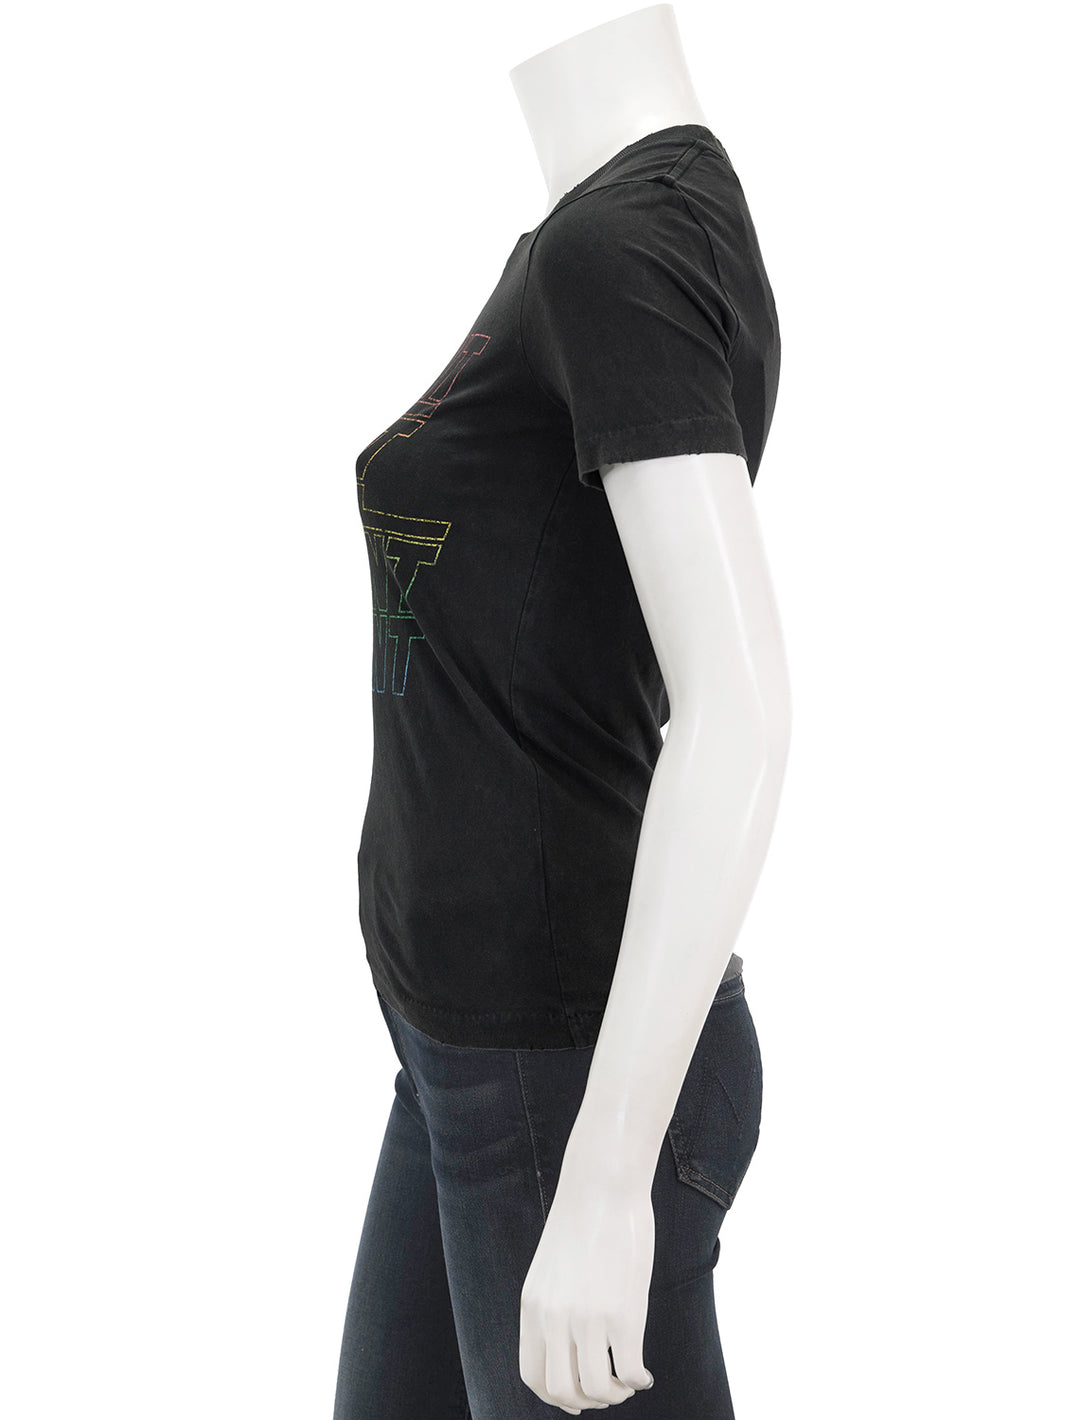 Side view of Isabel Marant Etoile's ziliani tee in faded black.